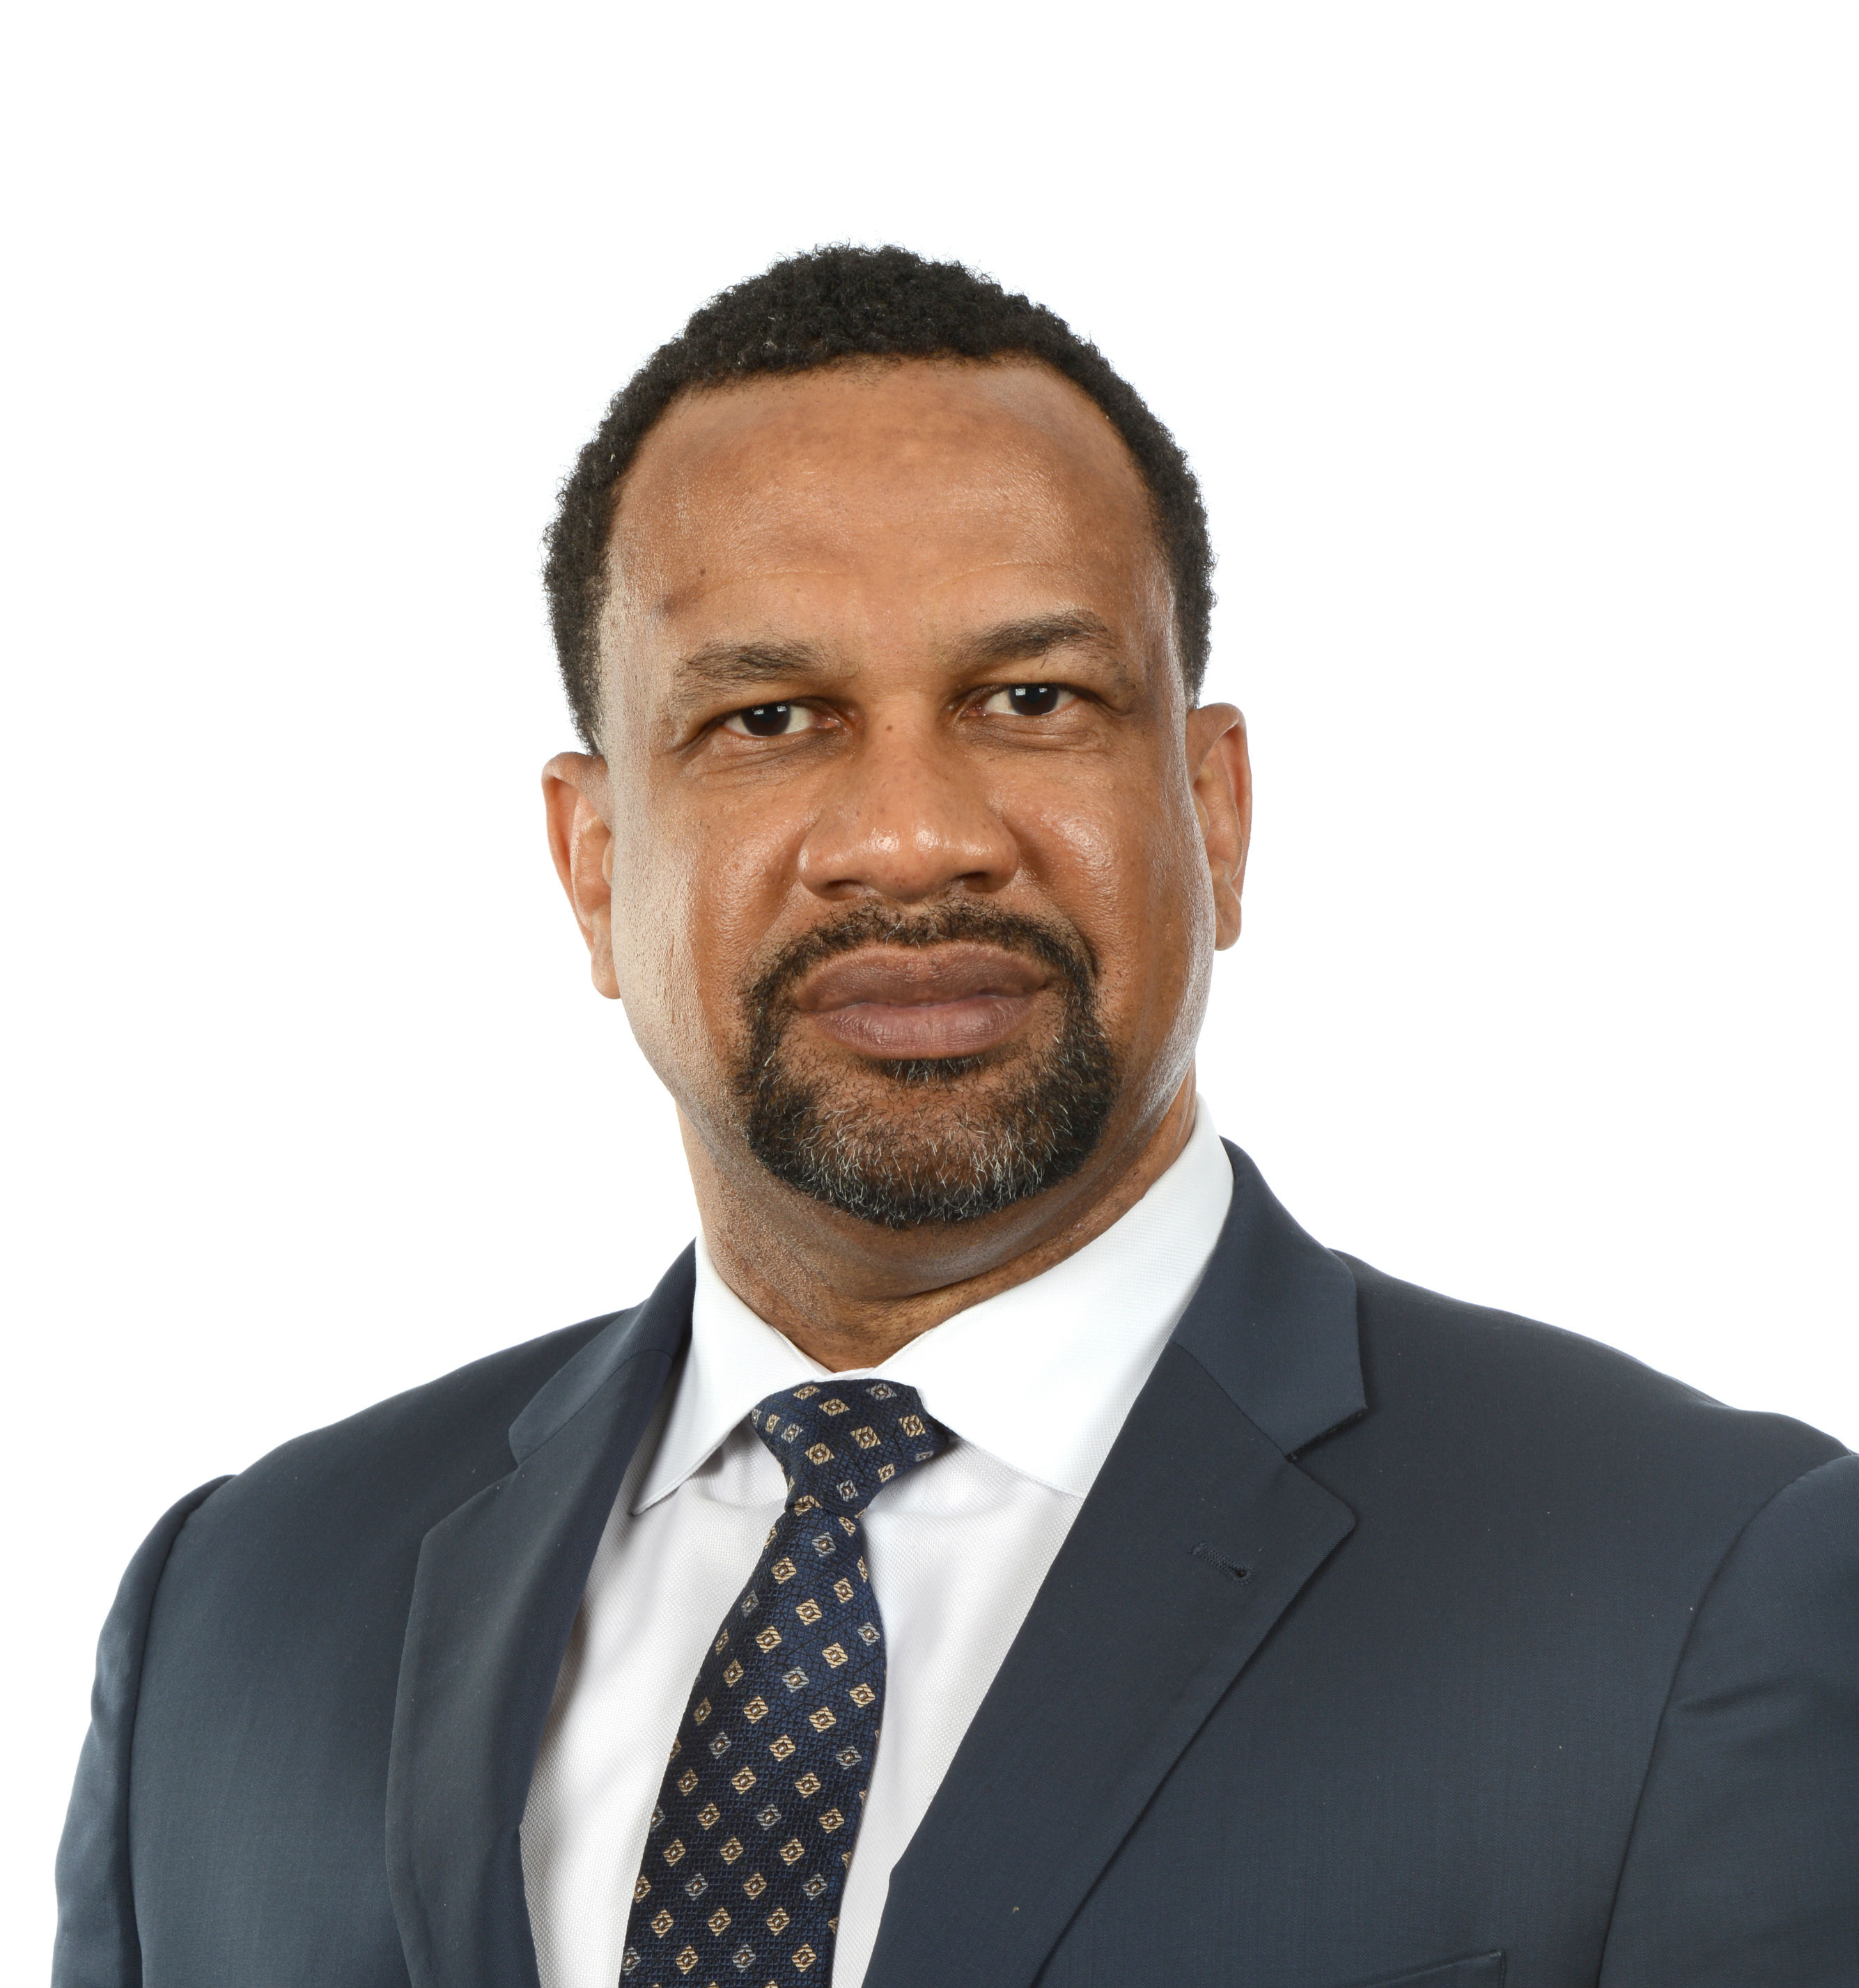 Gittens is a seasoned diversity and human resources professional, researcher, educator and consultant with more than three decades of experience.